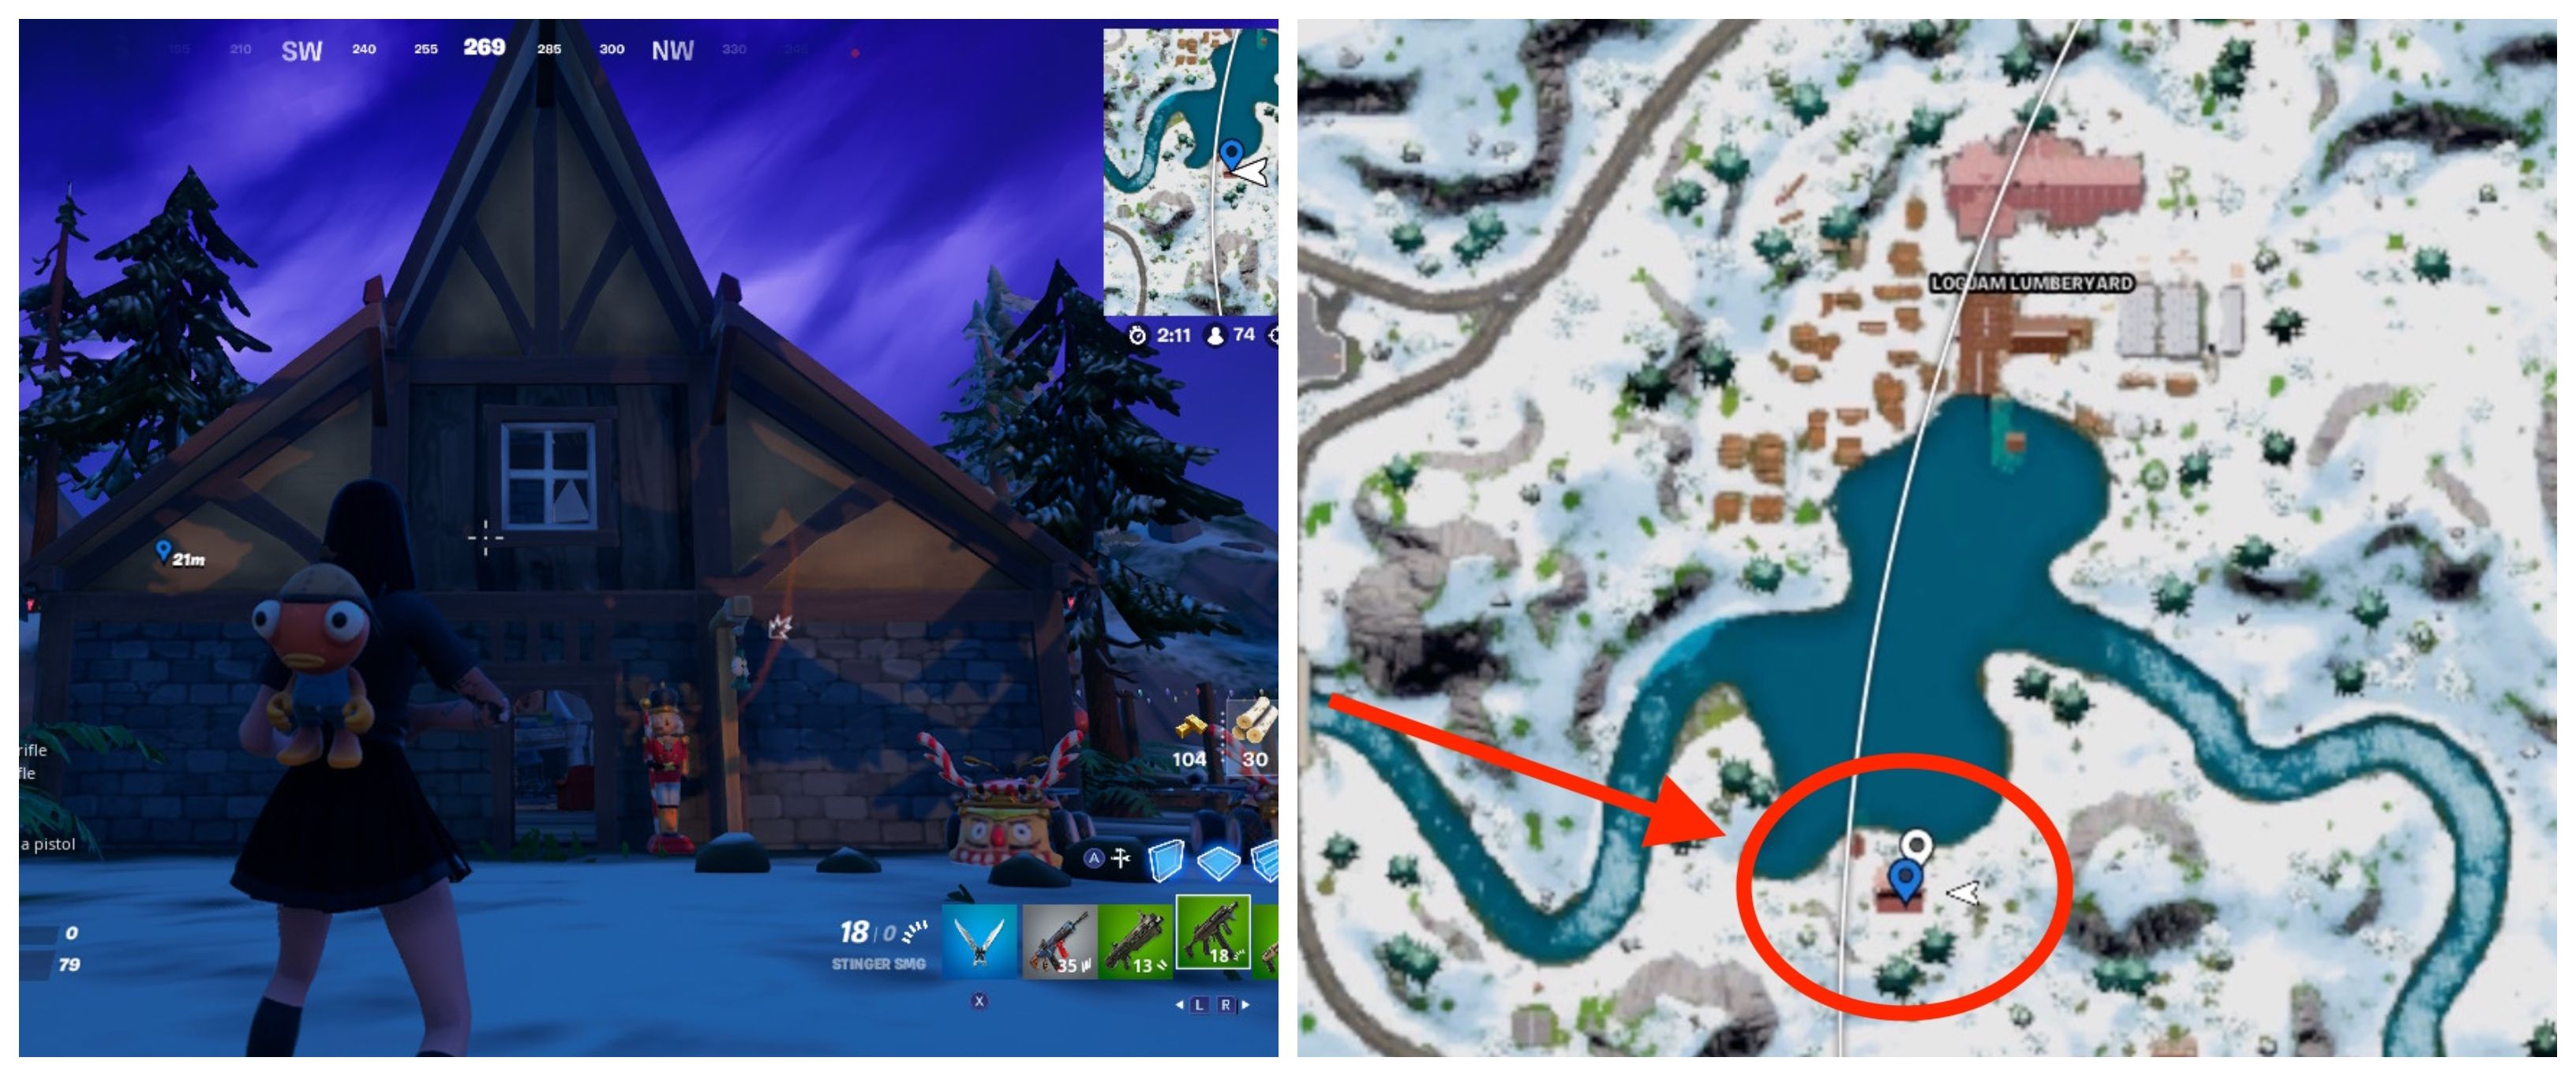 Fortnite Where to Find Crackshot's Cabin and Sgt. Winters